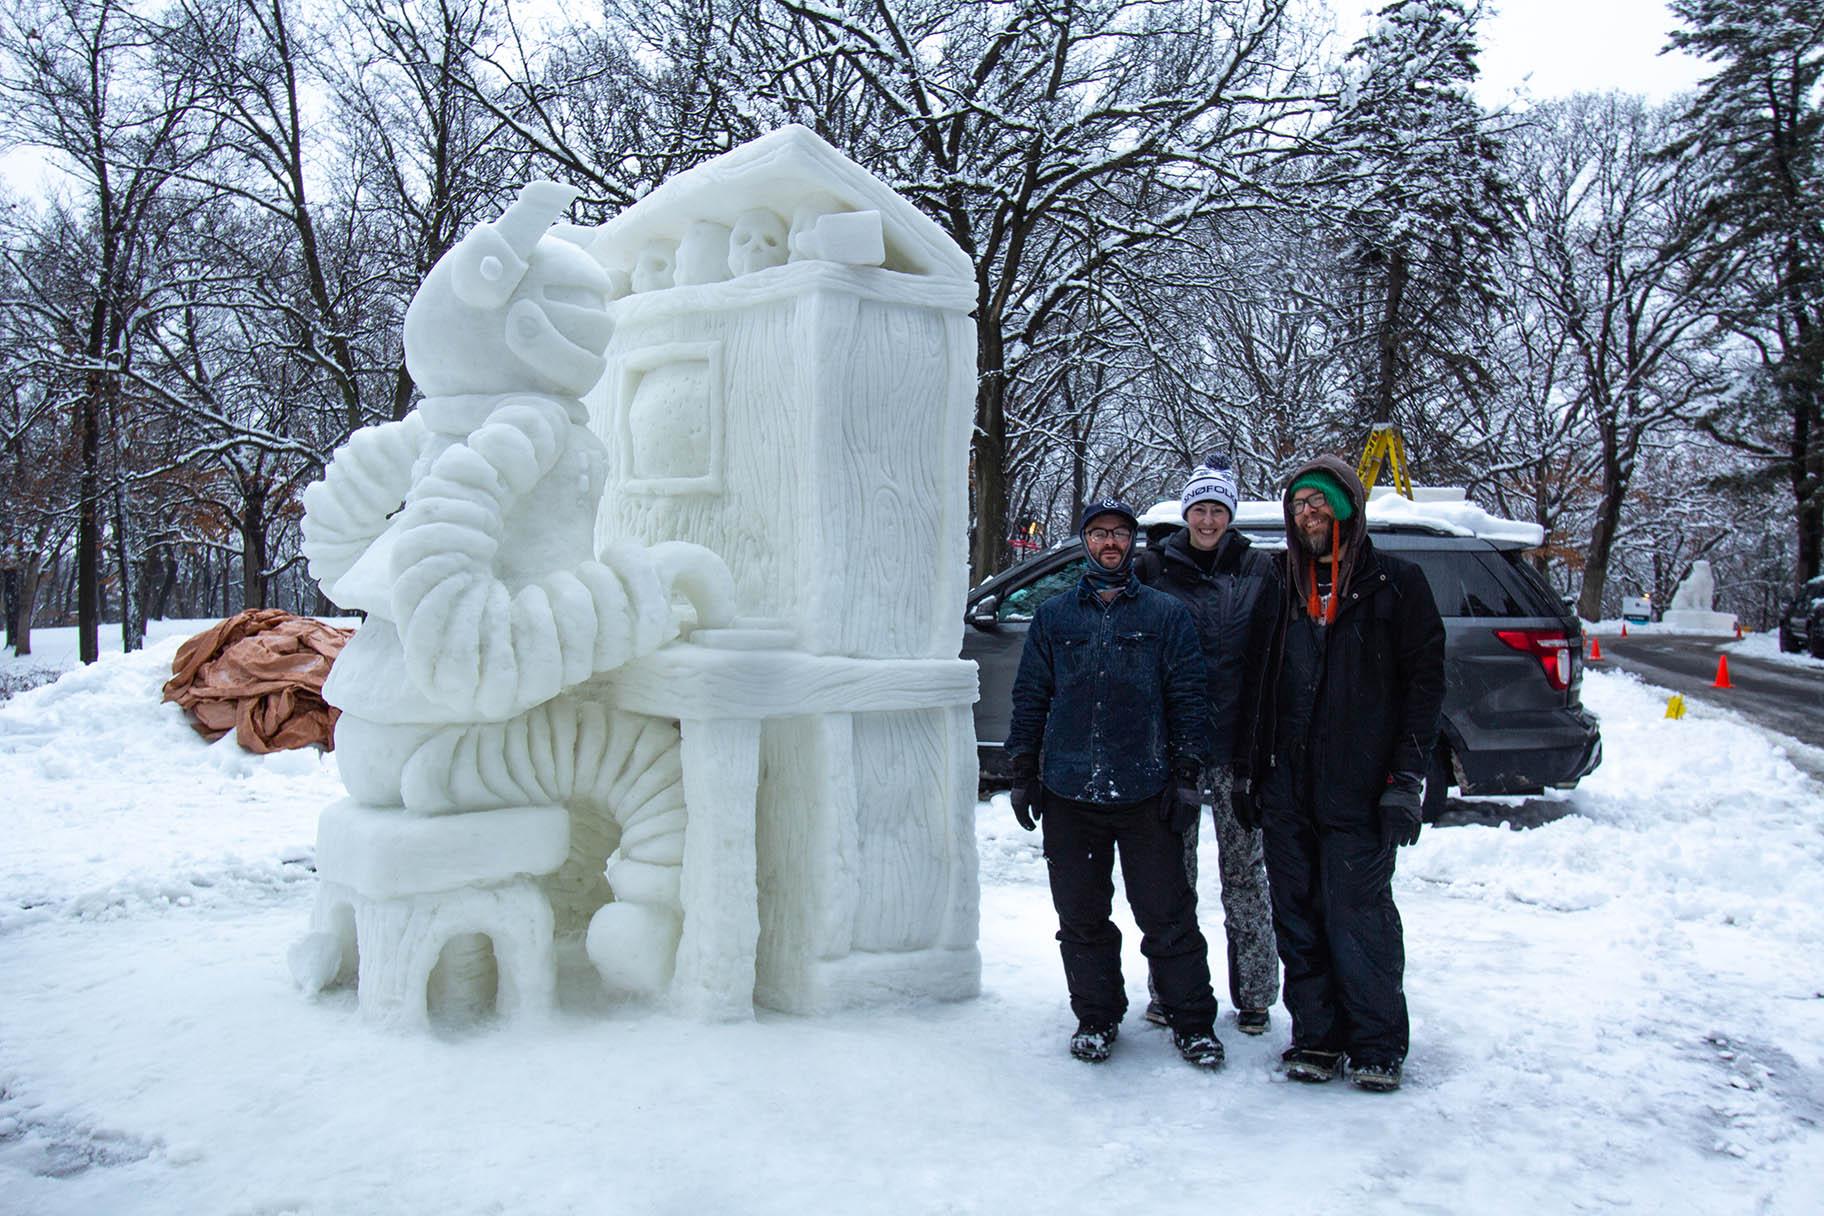 The winners of the 34th annual Illinois Snow Sculpting Competition, a team called Cave People from Space, pose next to their sculpture “Player Piano” on Saturday. (Courtesy Rockford Park District)